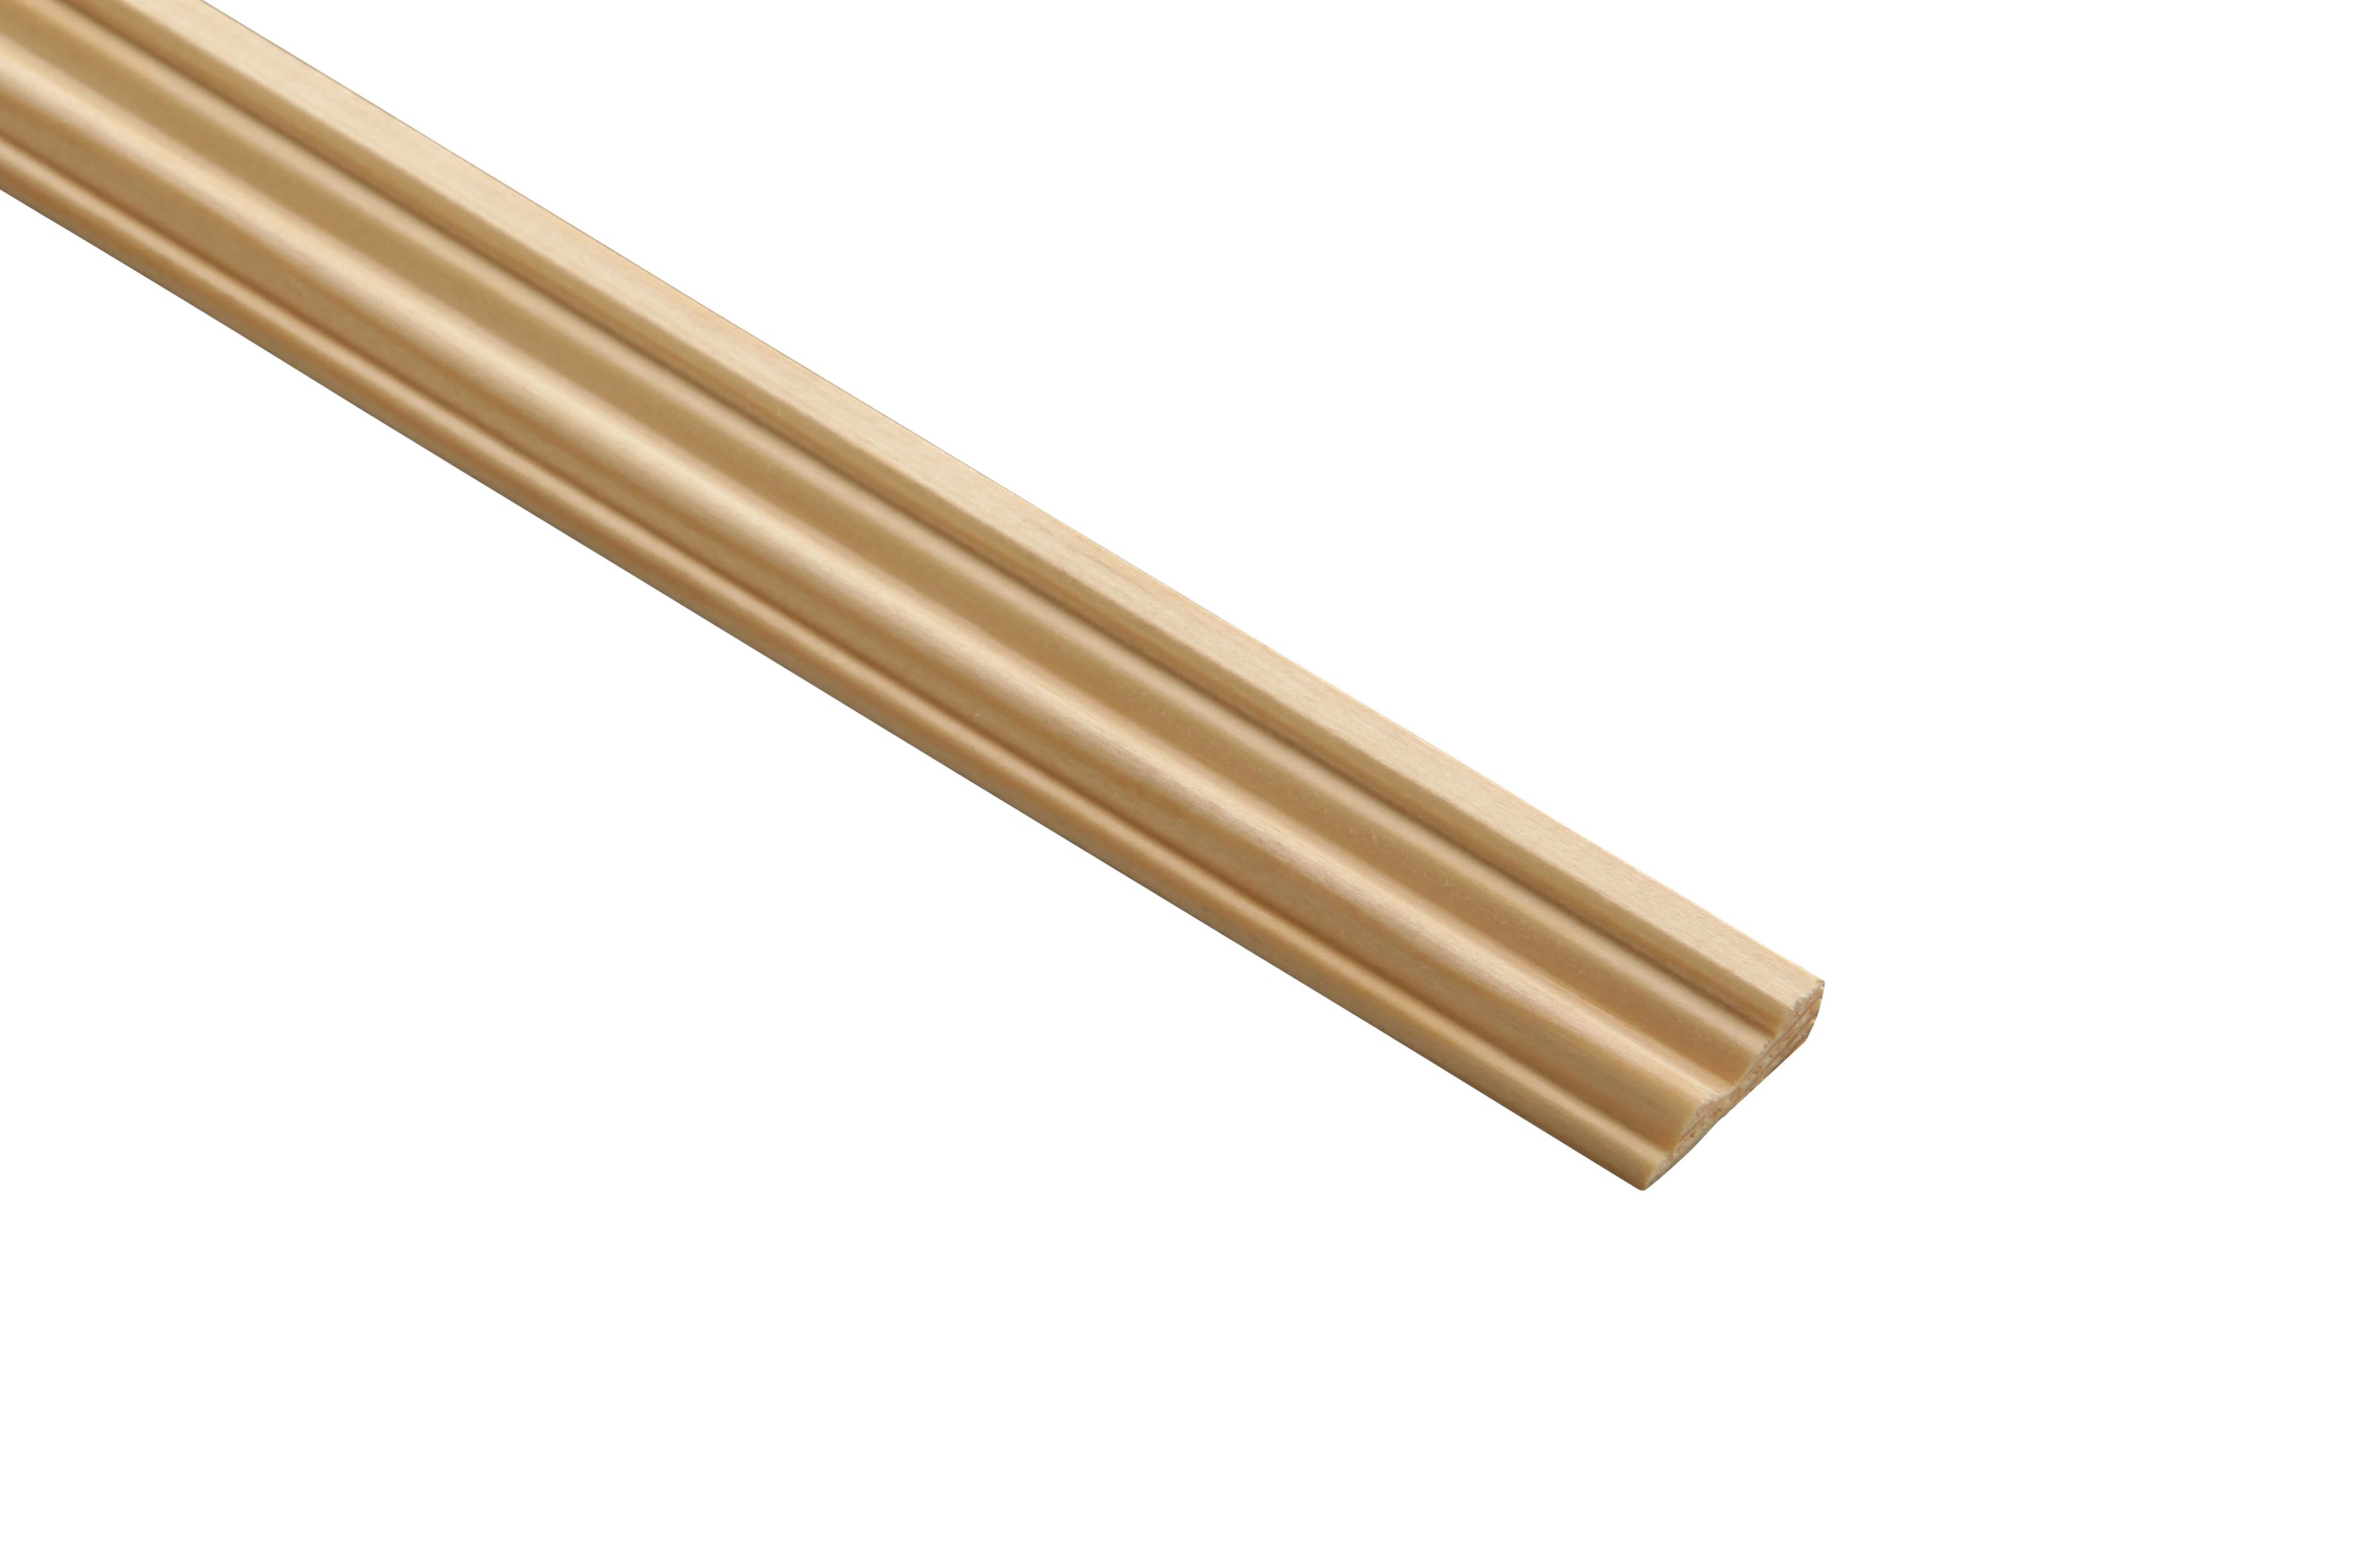 Image of Wickes Pine Base Moulding - 21 x 8 x 2400mm